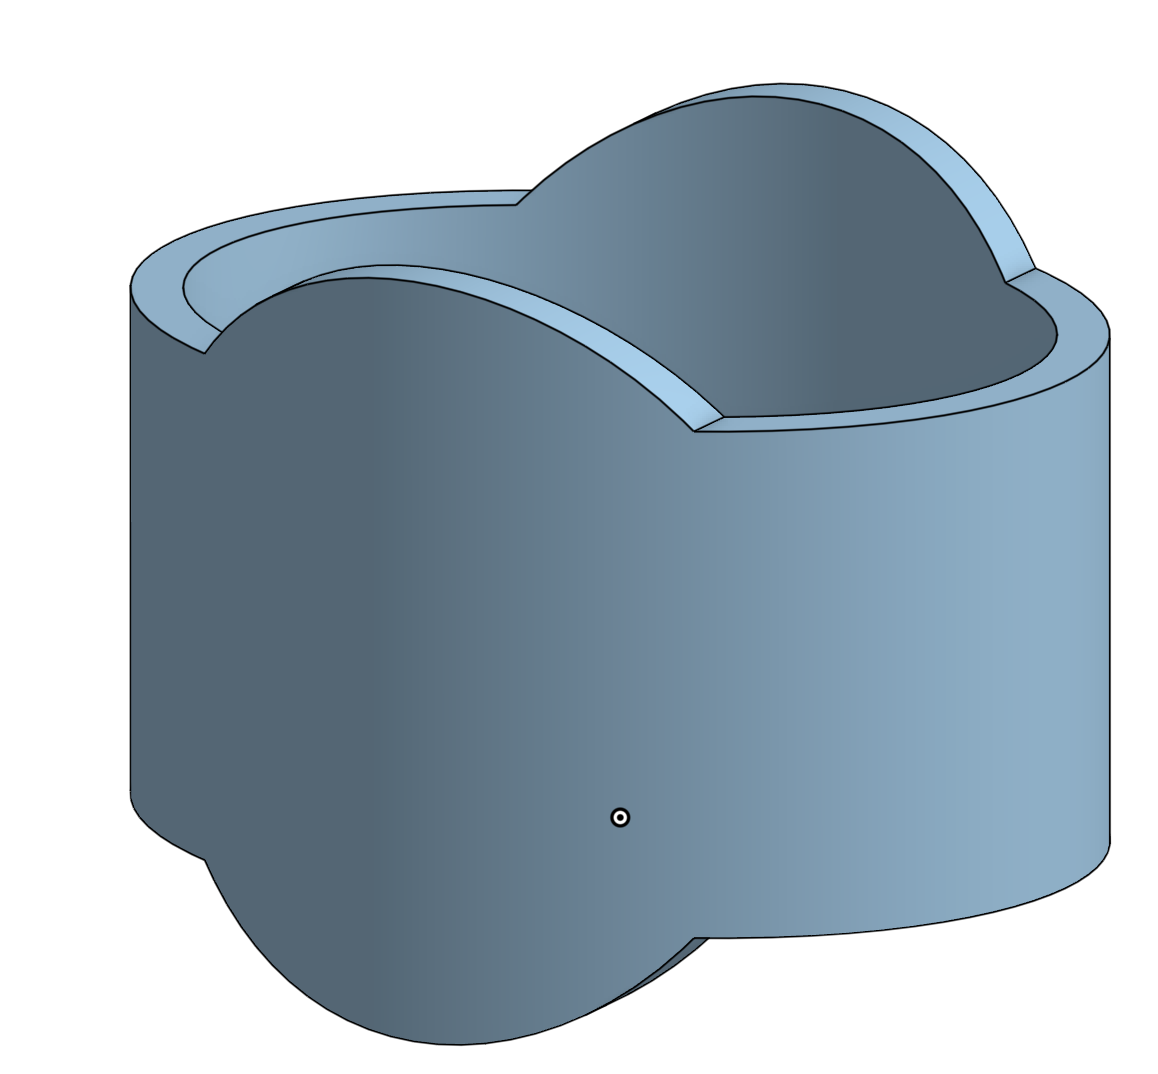 Image shows of a CAD design of a part to be 3D printed with SLA